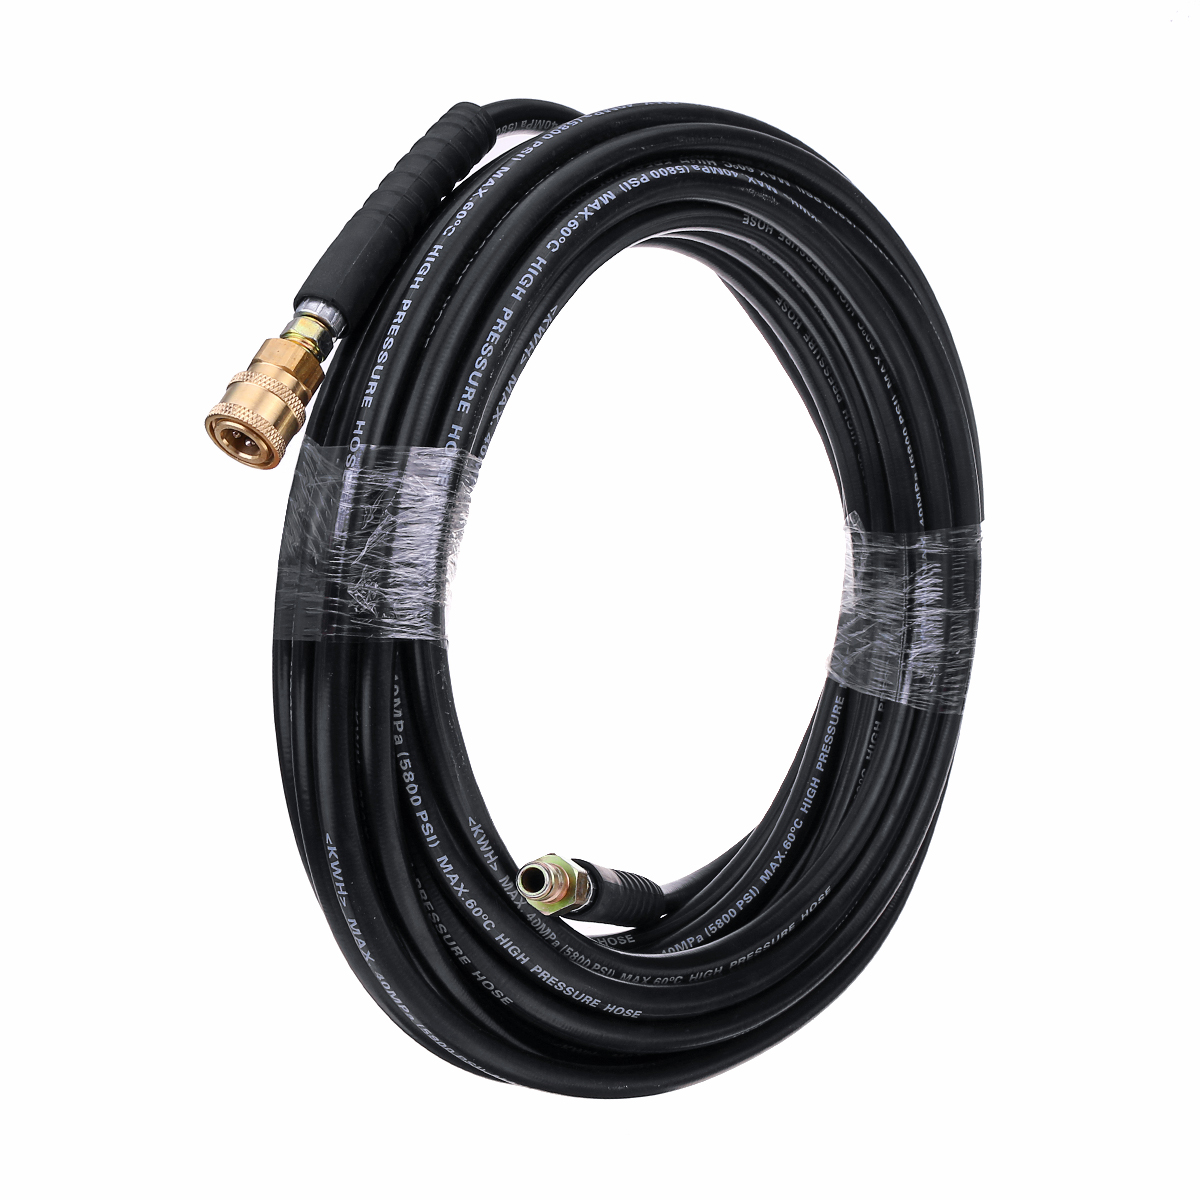 15M-40MPa-High-Pressure-Washer-Cleaning-Hose-14-Inch-Quick-Release-Couplings-Garden-Washing-Tools-Co-1570347-4